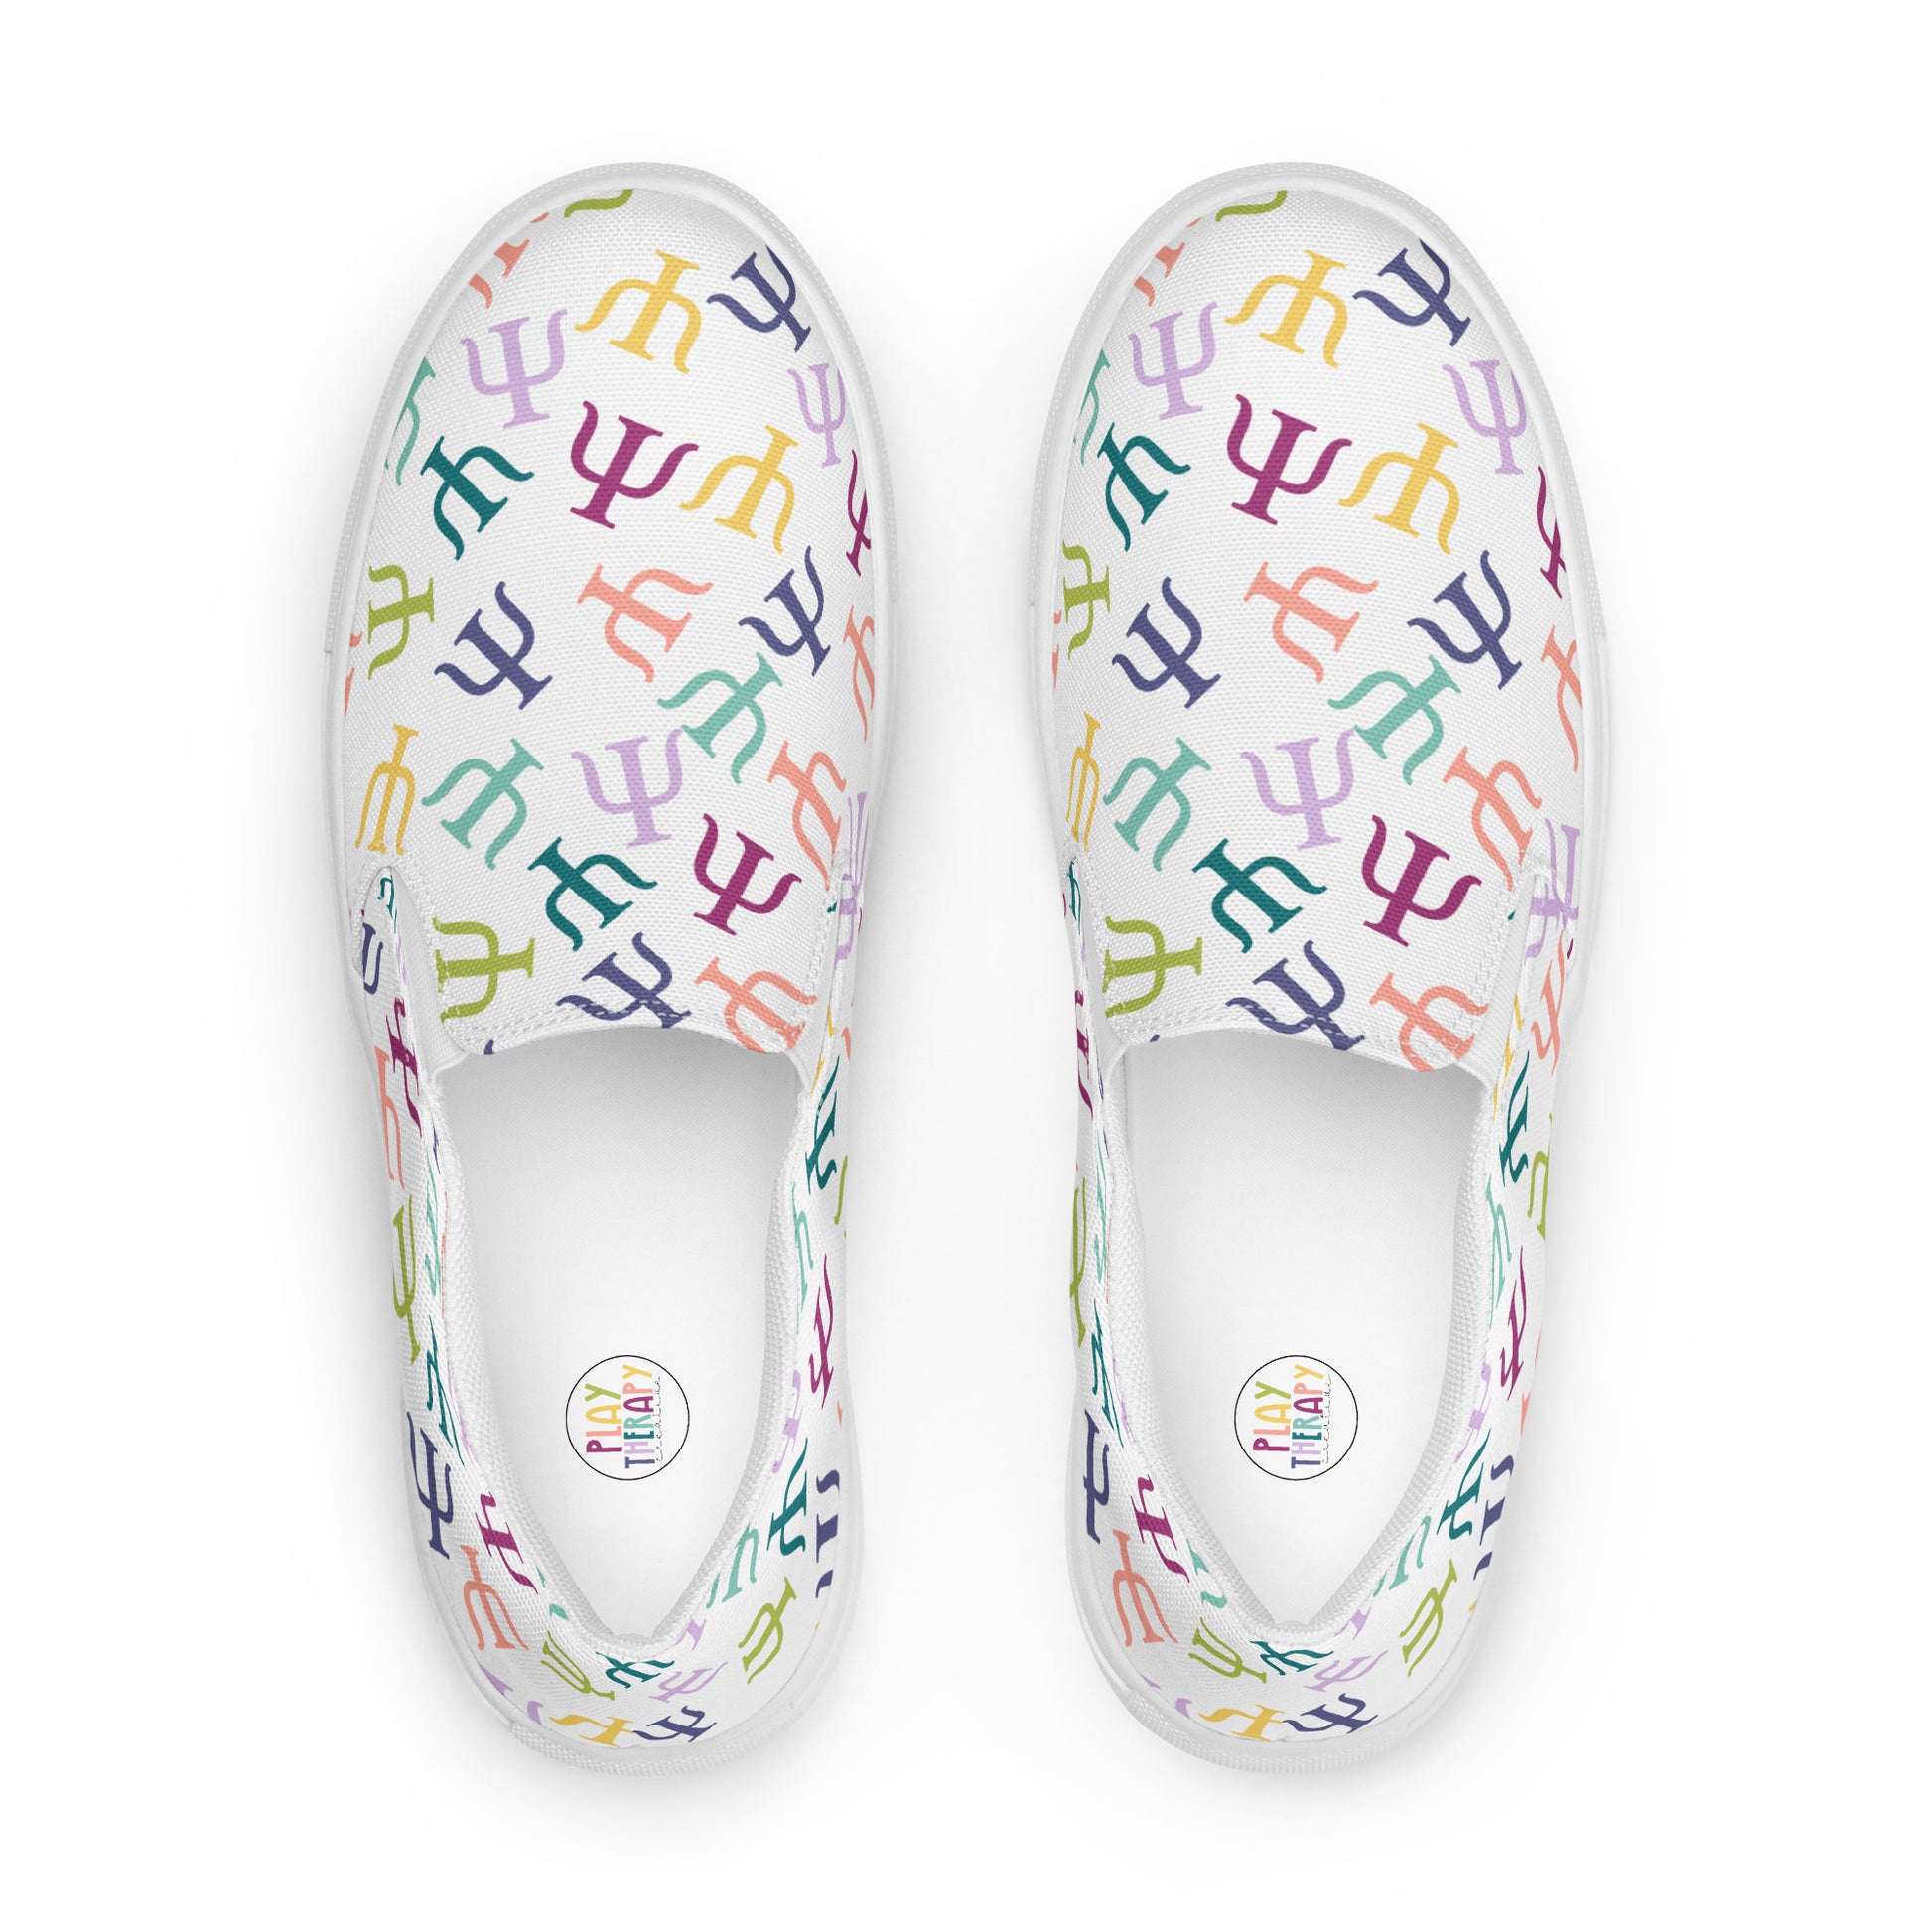 Teal Psych Symbol Slip-on Canvas Shoes (Women's Sizes) – Play Therapy  Creative